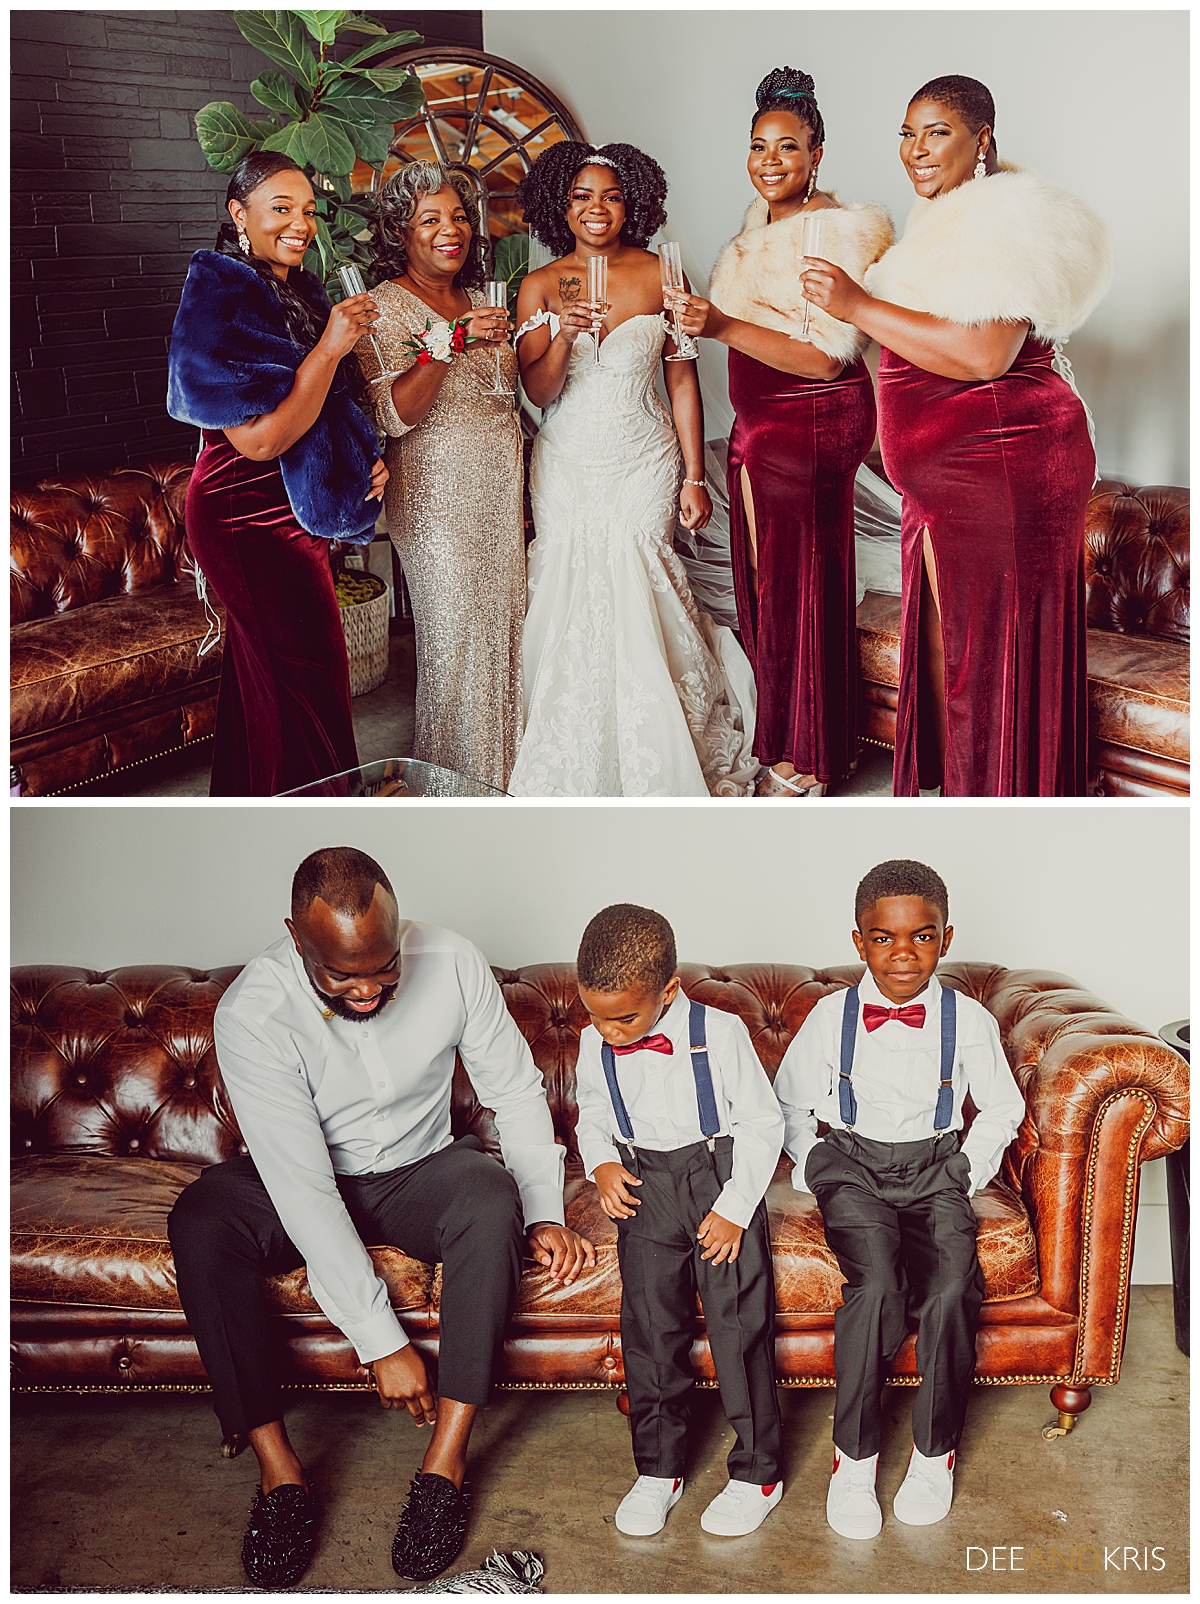 Two images: Top image of bride toasting with bridesmaids. Bottom image of Groom getting dressed with their two sons.